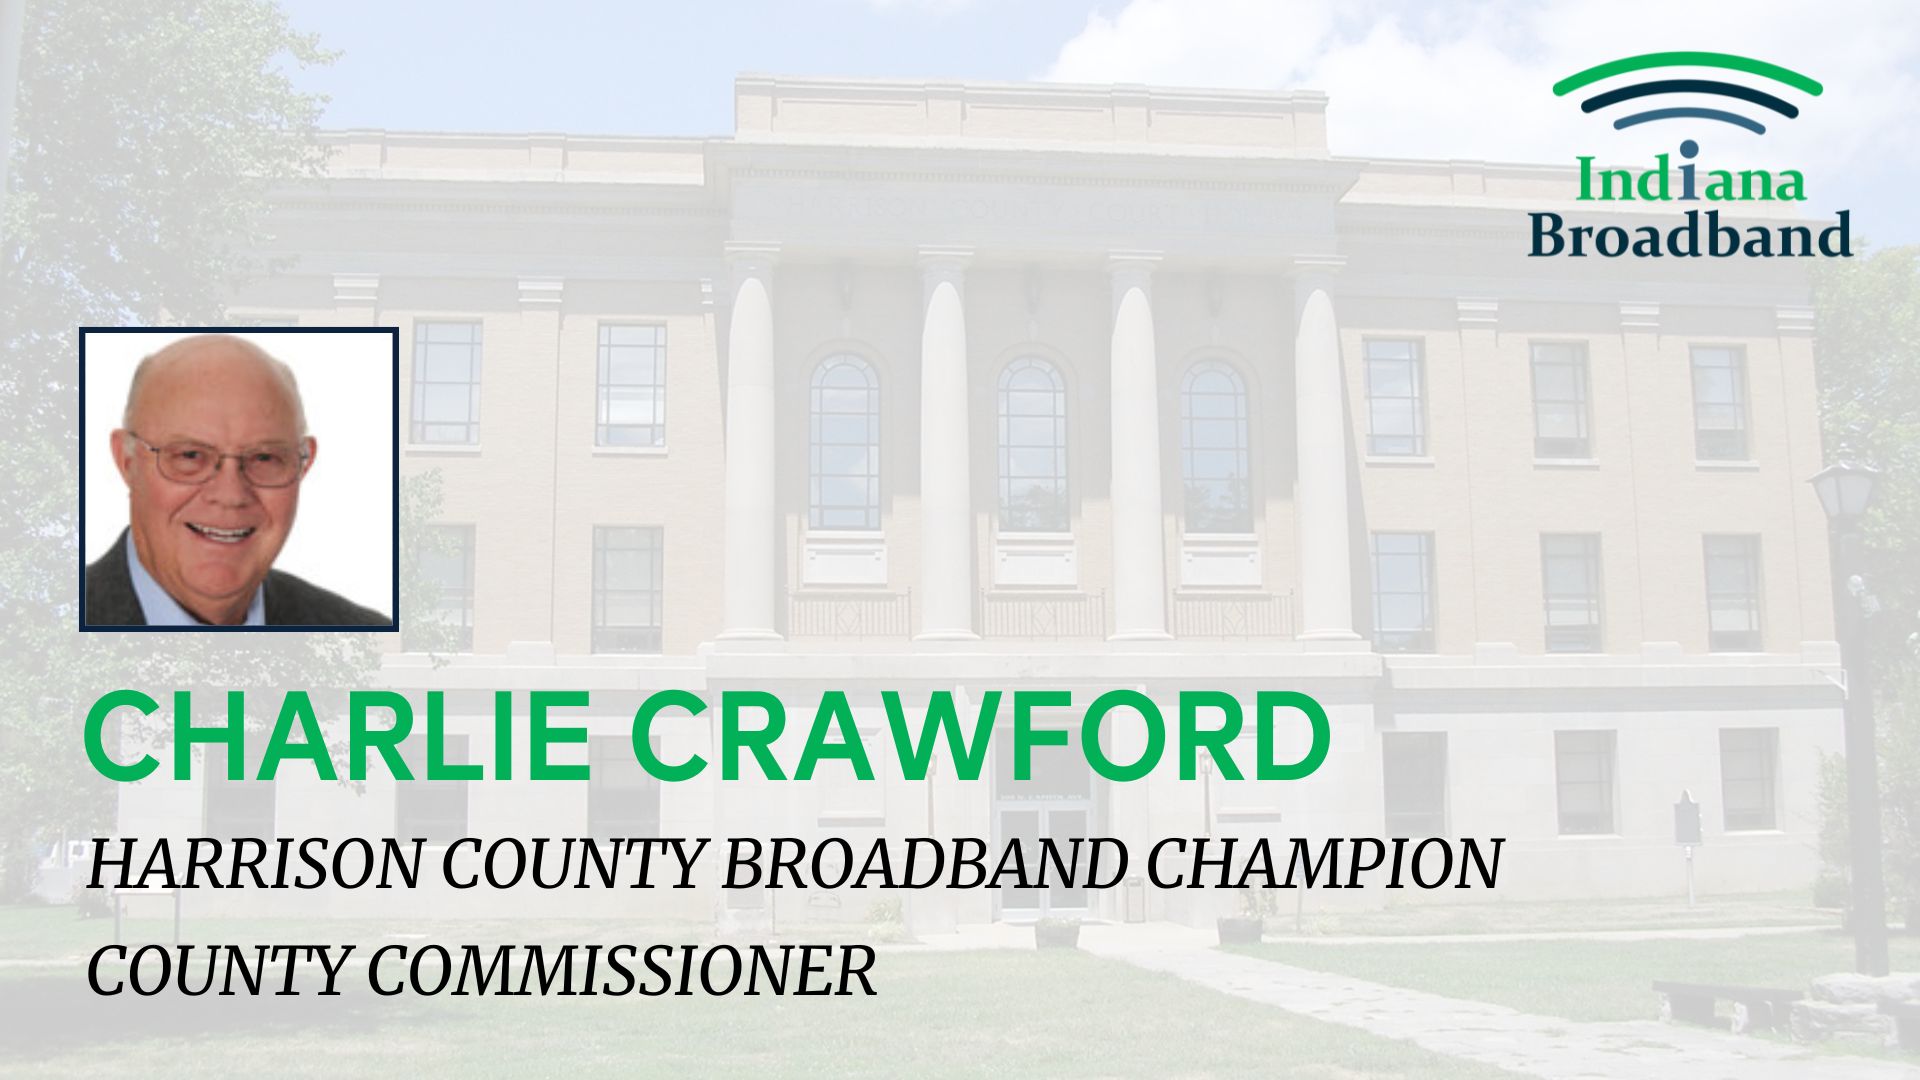 Charlie Crawford, Harrison County Commissioner